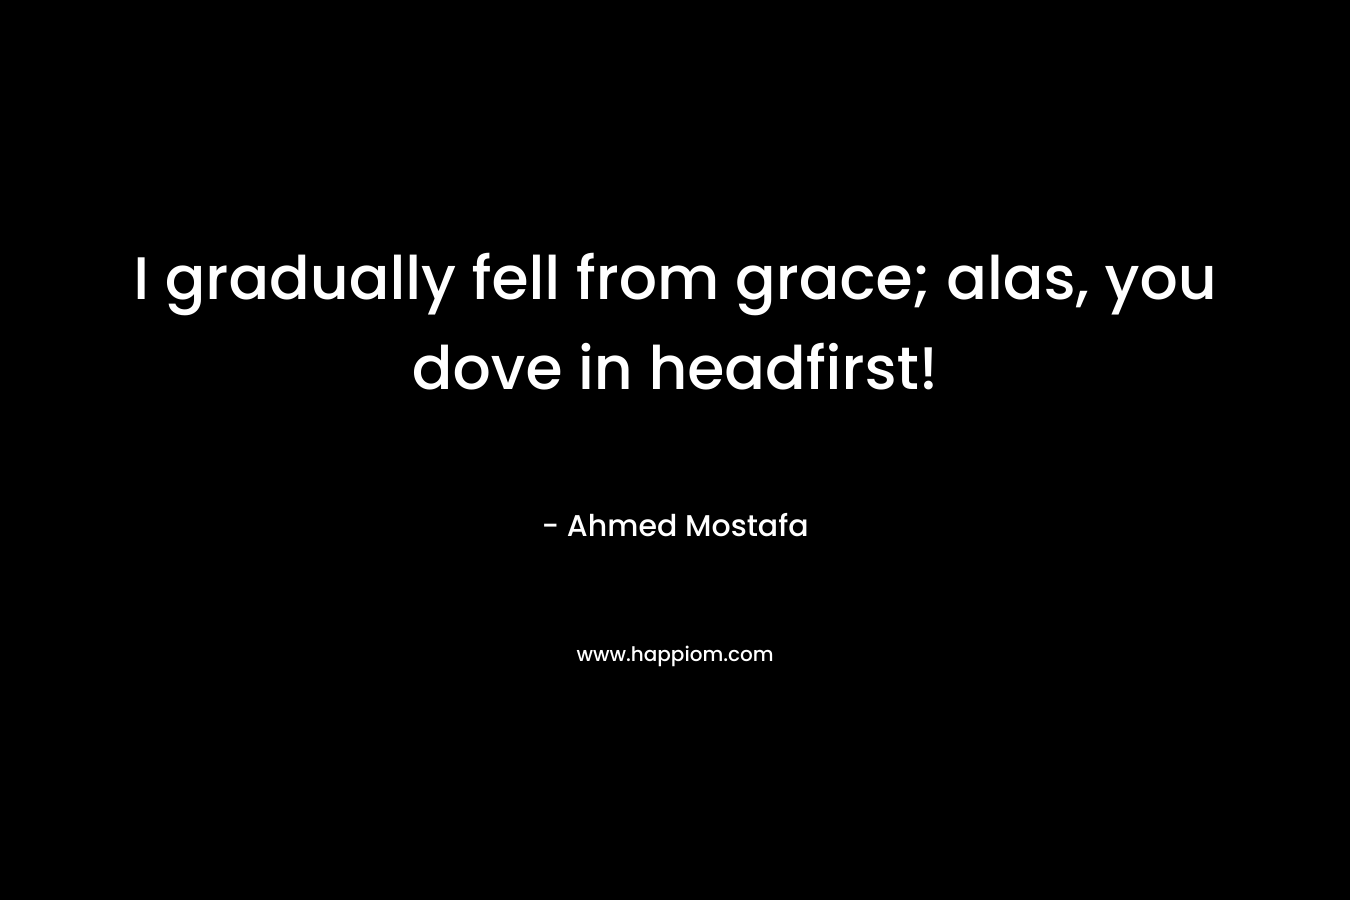 I gradually fell from grace; alas, you dove in headfirst!